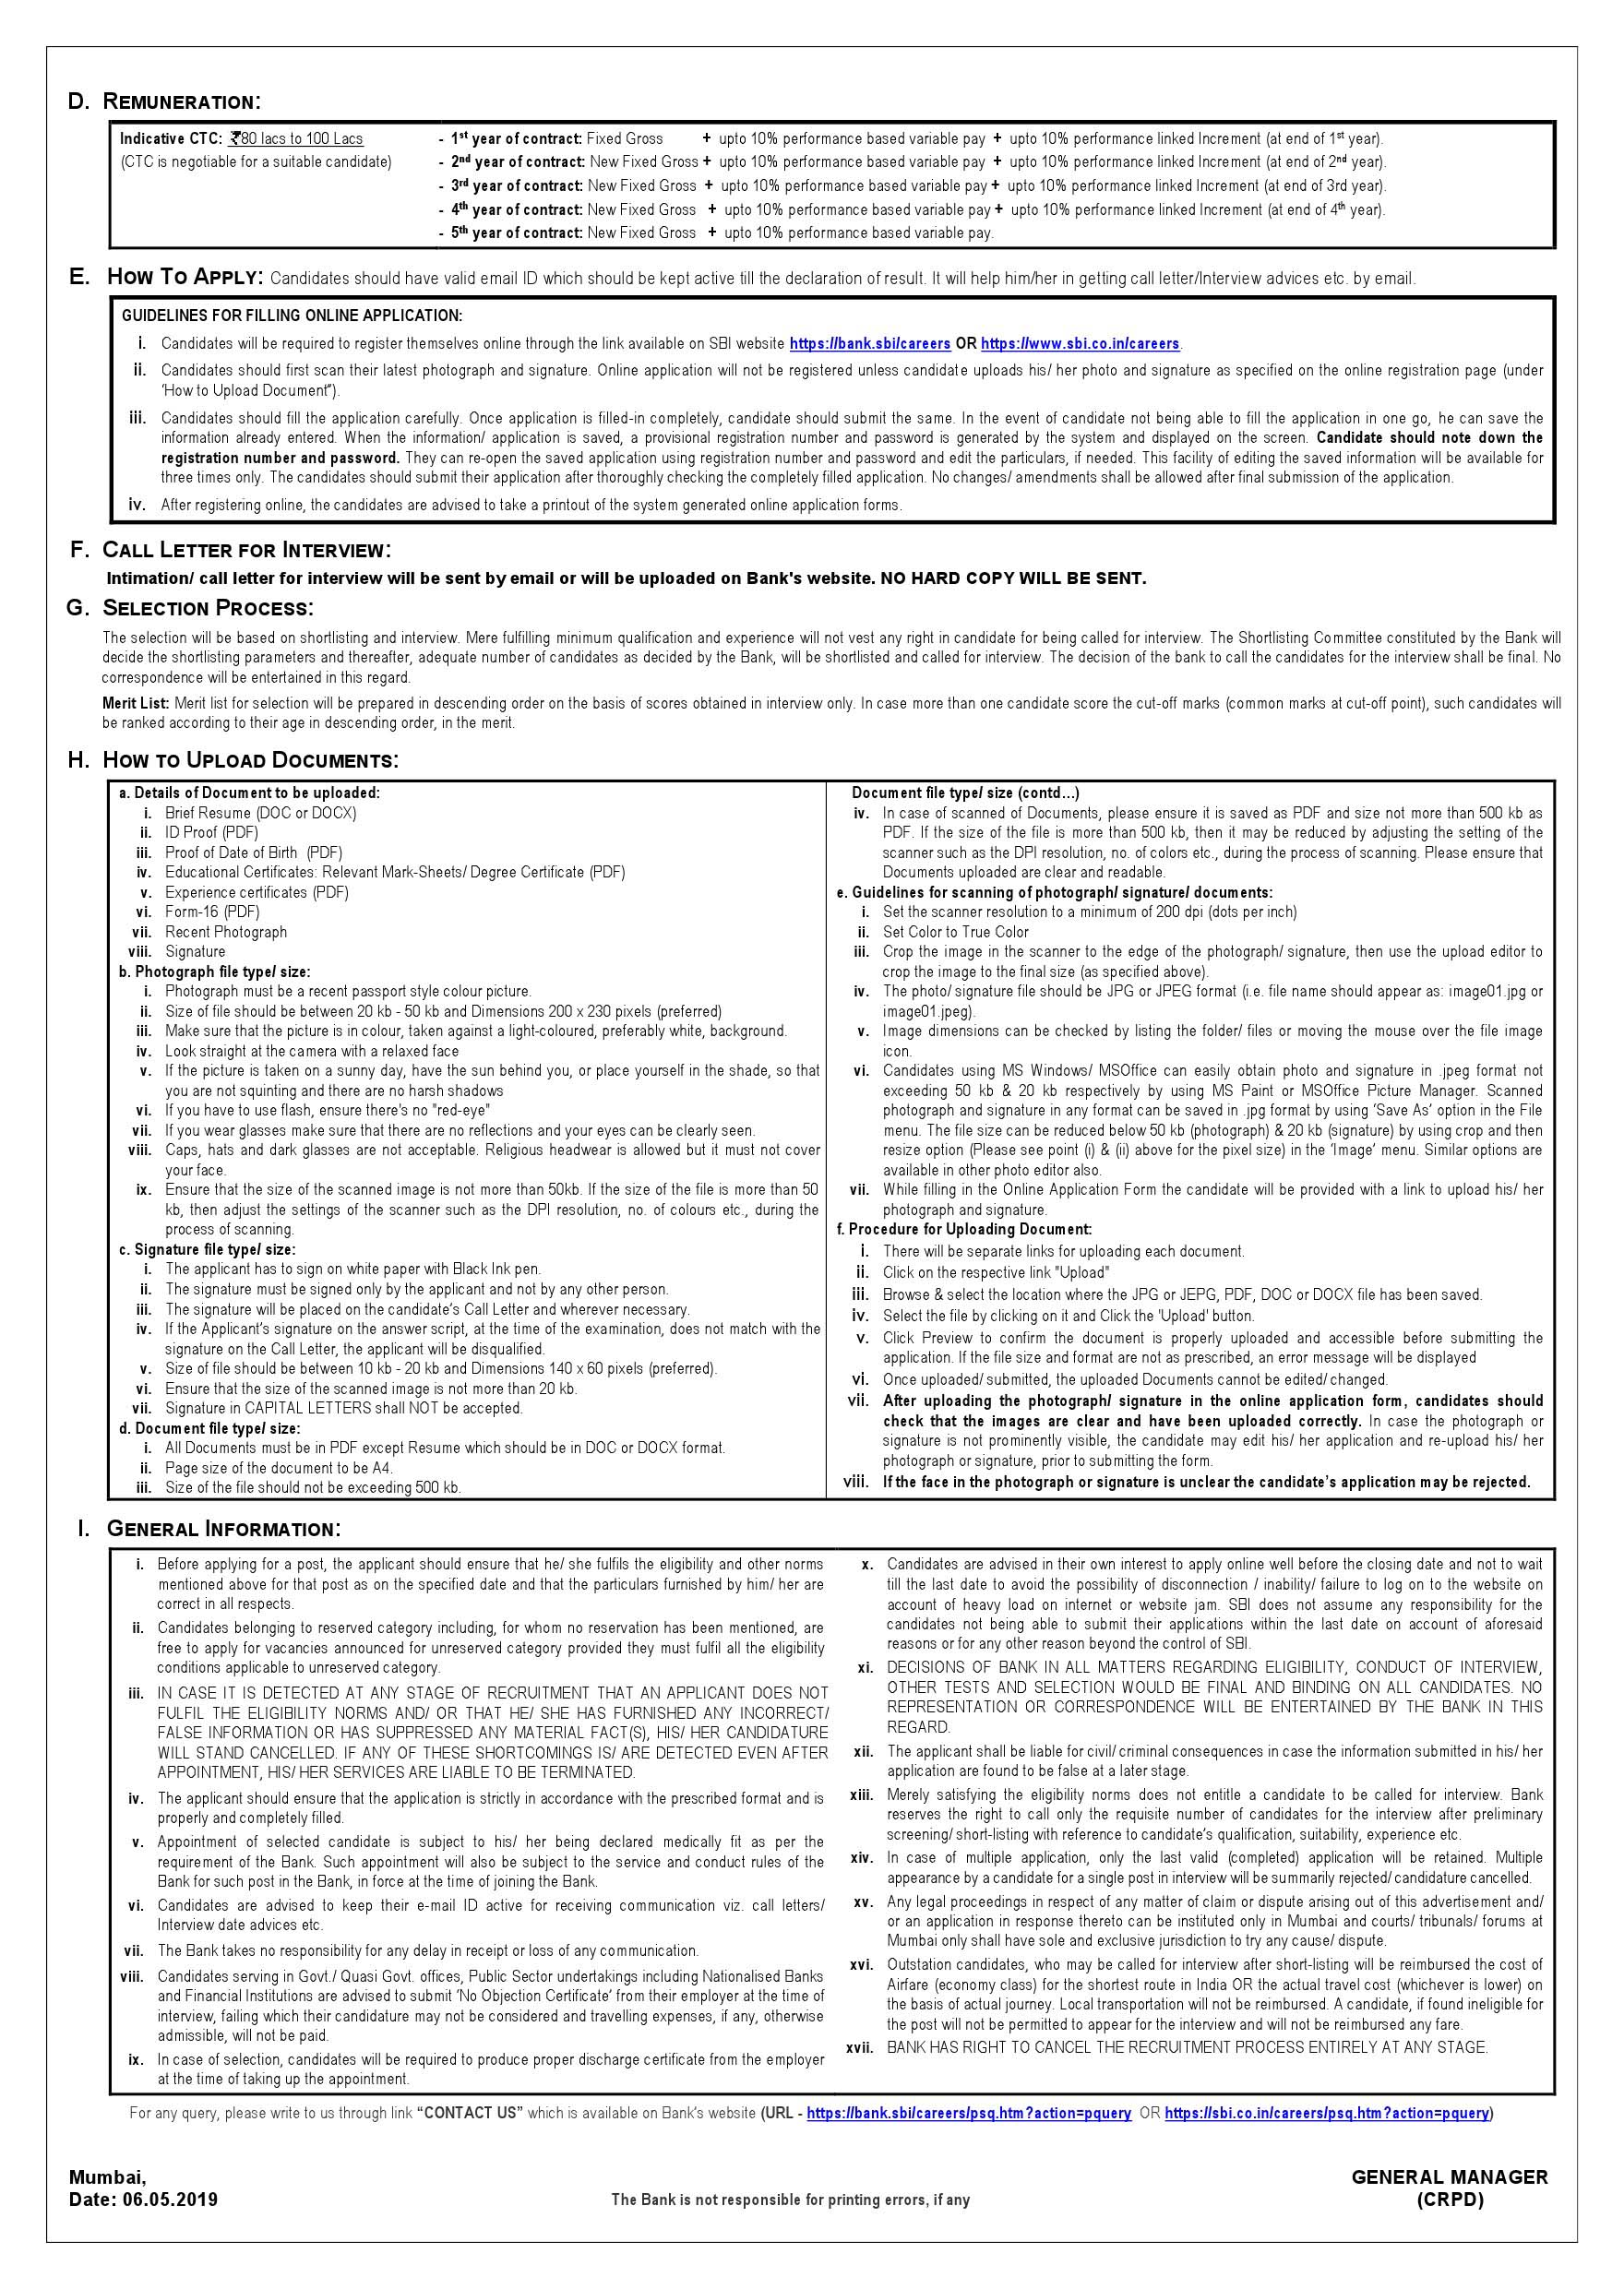 Recruitment Of Specialist Cadre Officers In SBI On Contract Basis - Notification Image 2